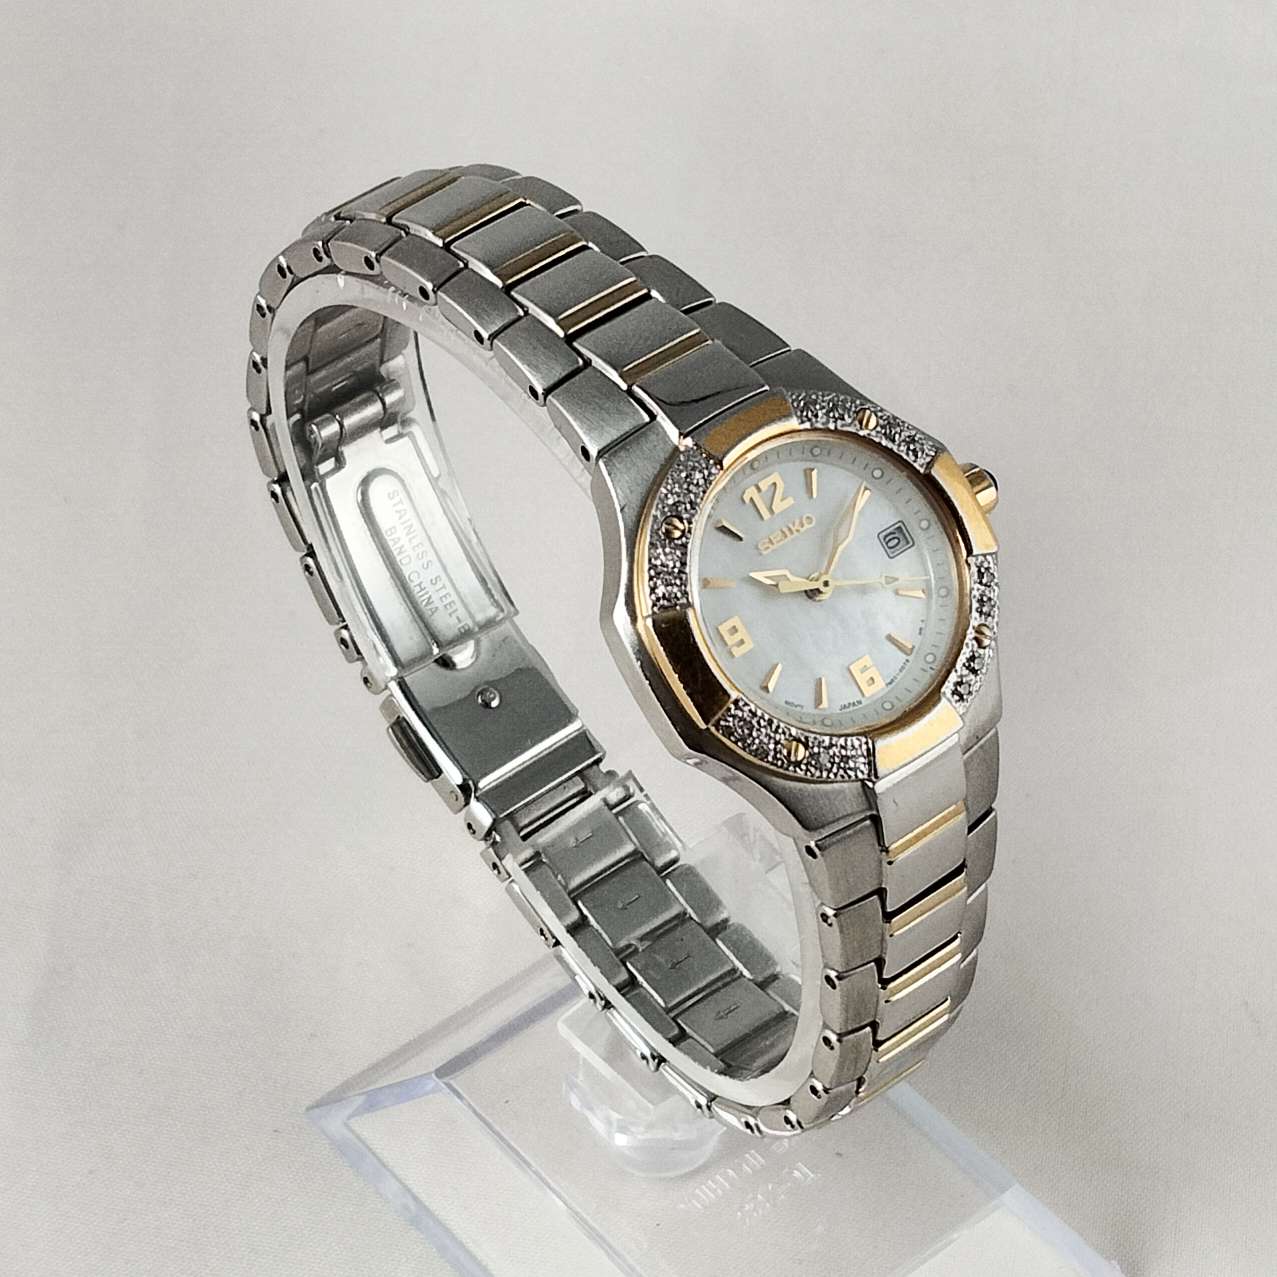 Seiko Watch, Mother of Pearl Dial, Jewel Details, Bracelet Strap